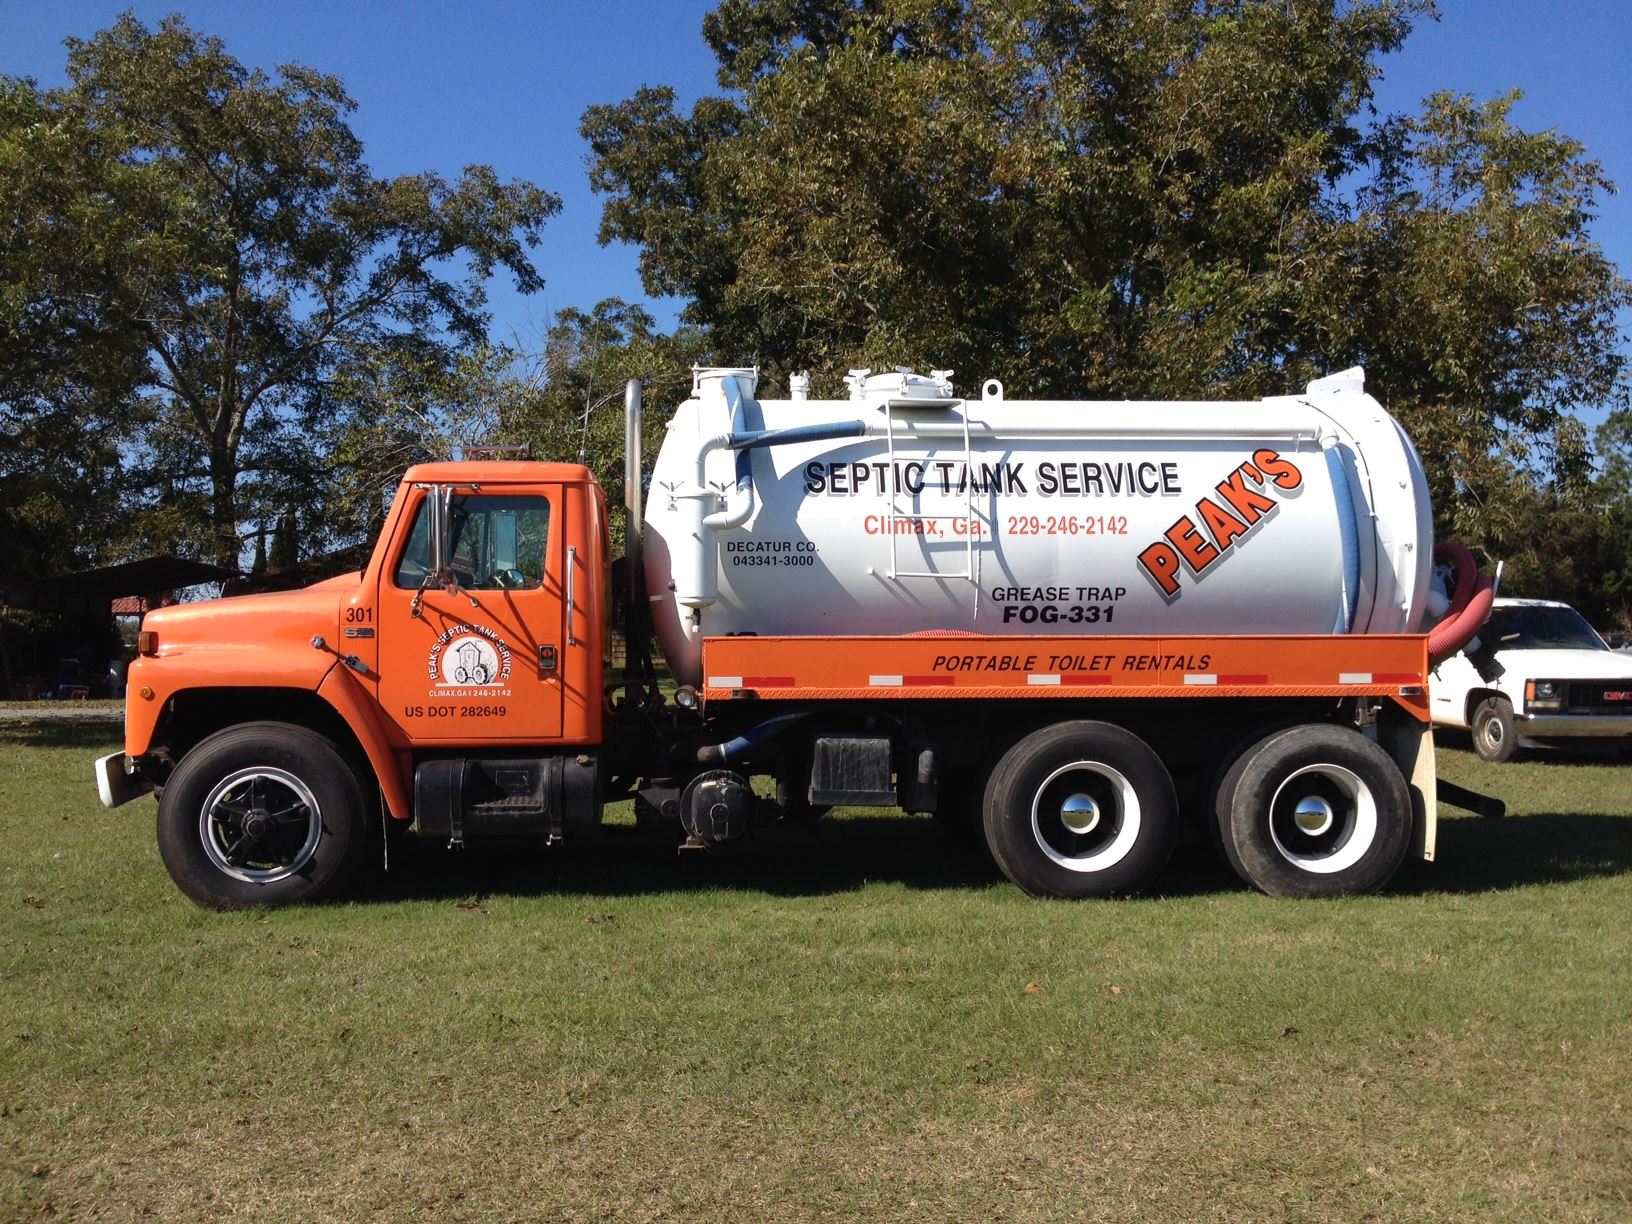 Peaks Septic Tank Services 295 Phillips-Pope Rd, Climax Georgia 39834